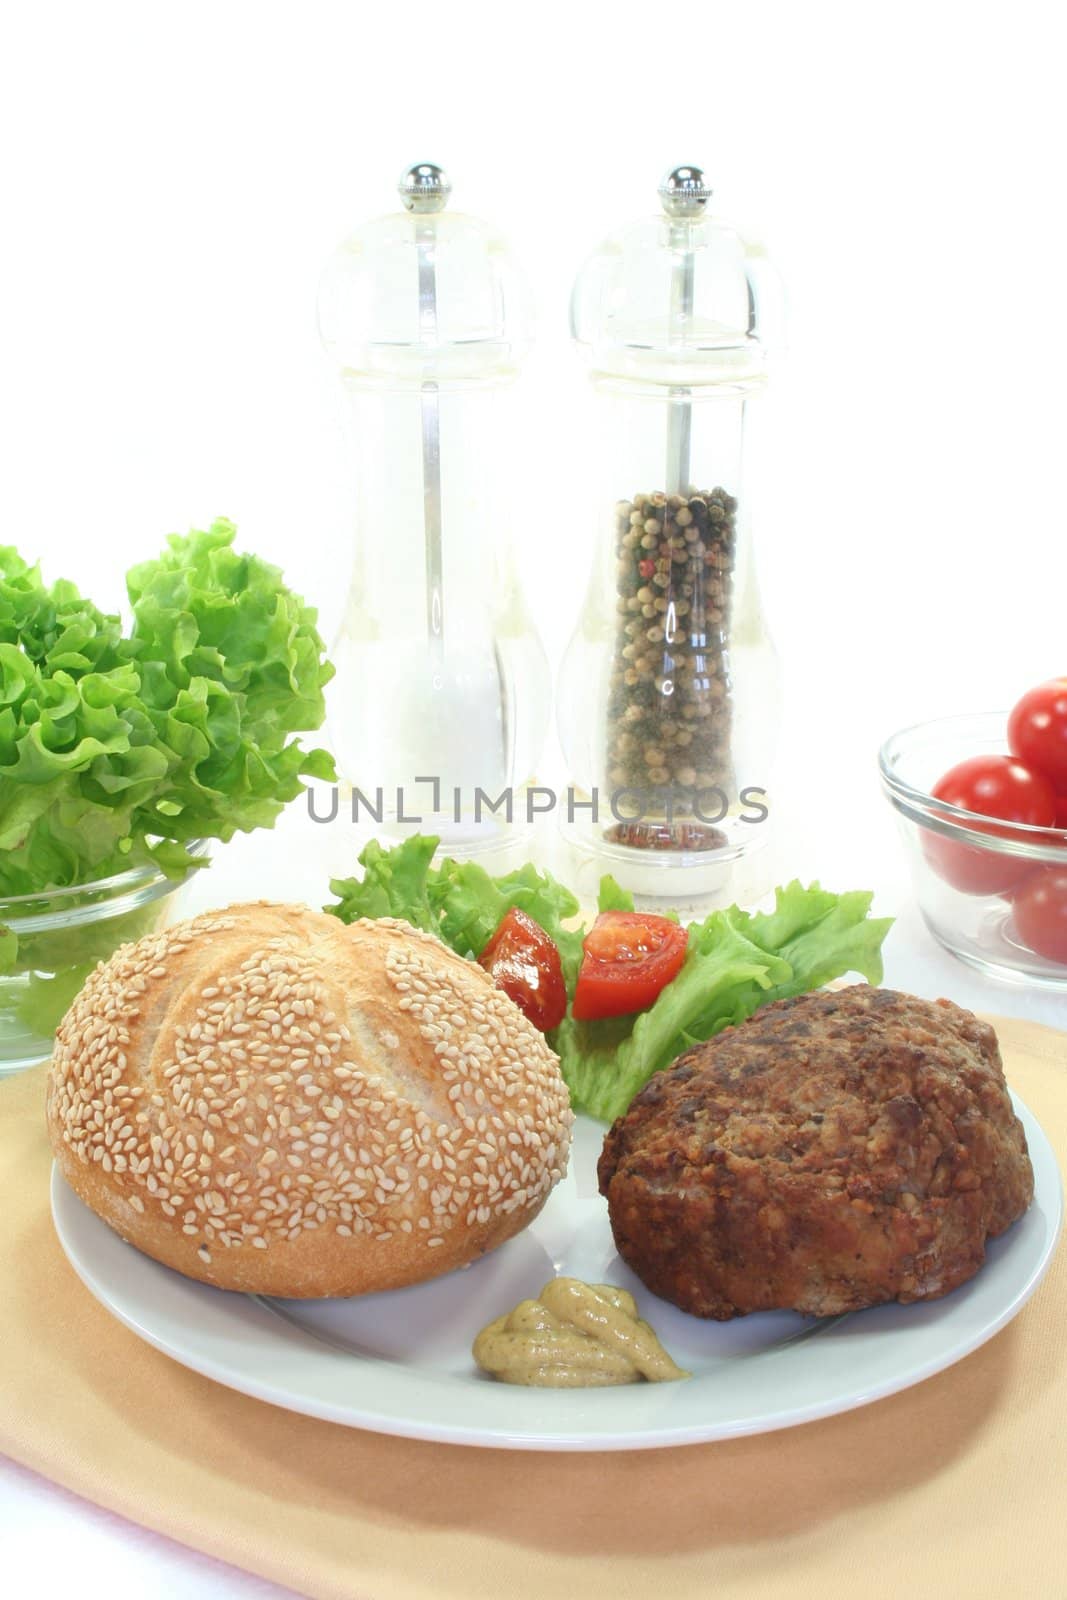 meatball with bun, fresh lettuce and tomato pieces